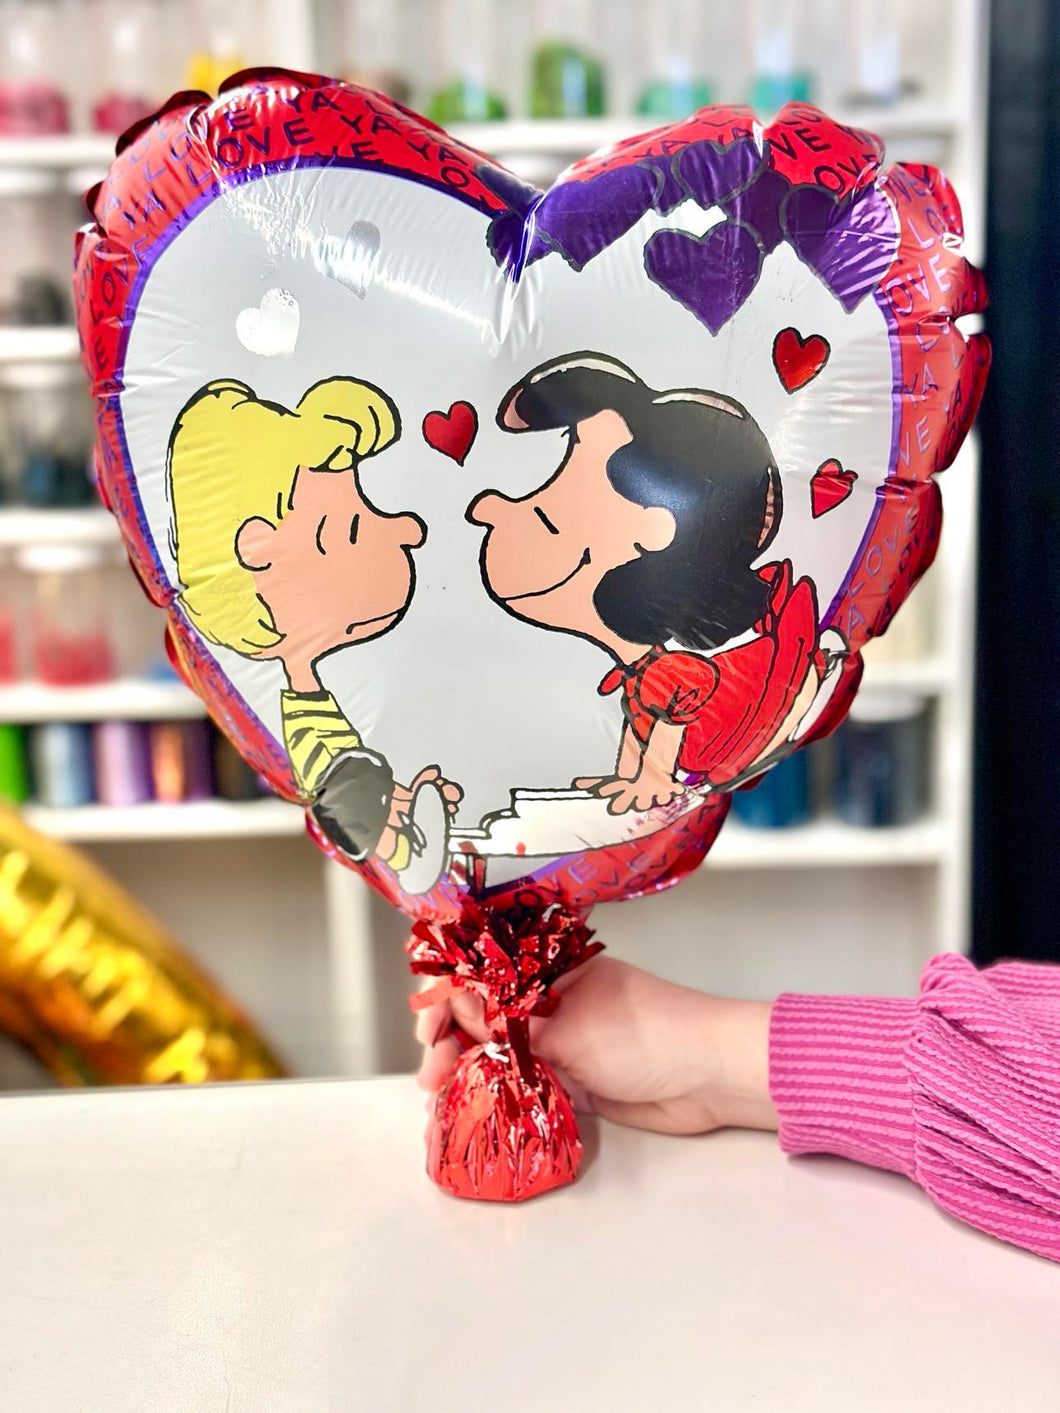 Charlie Brown & Lucy Heart Shaped Balloon